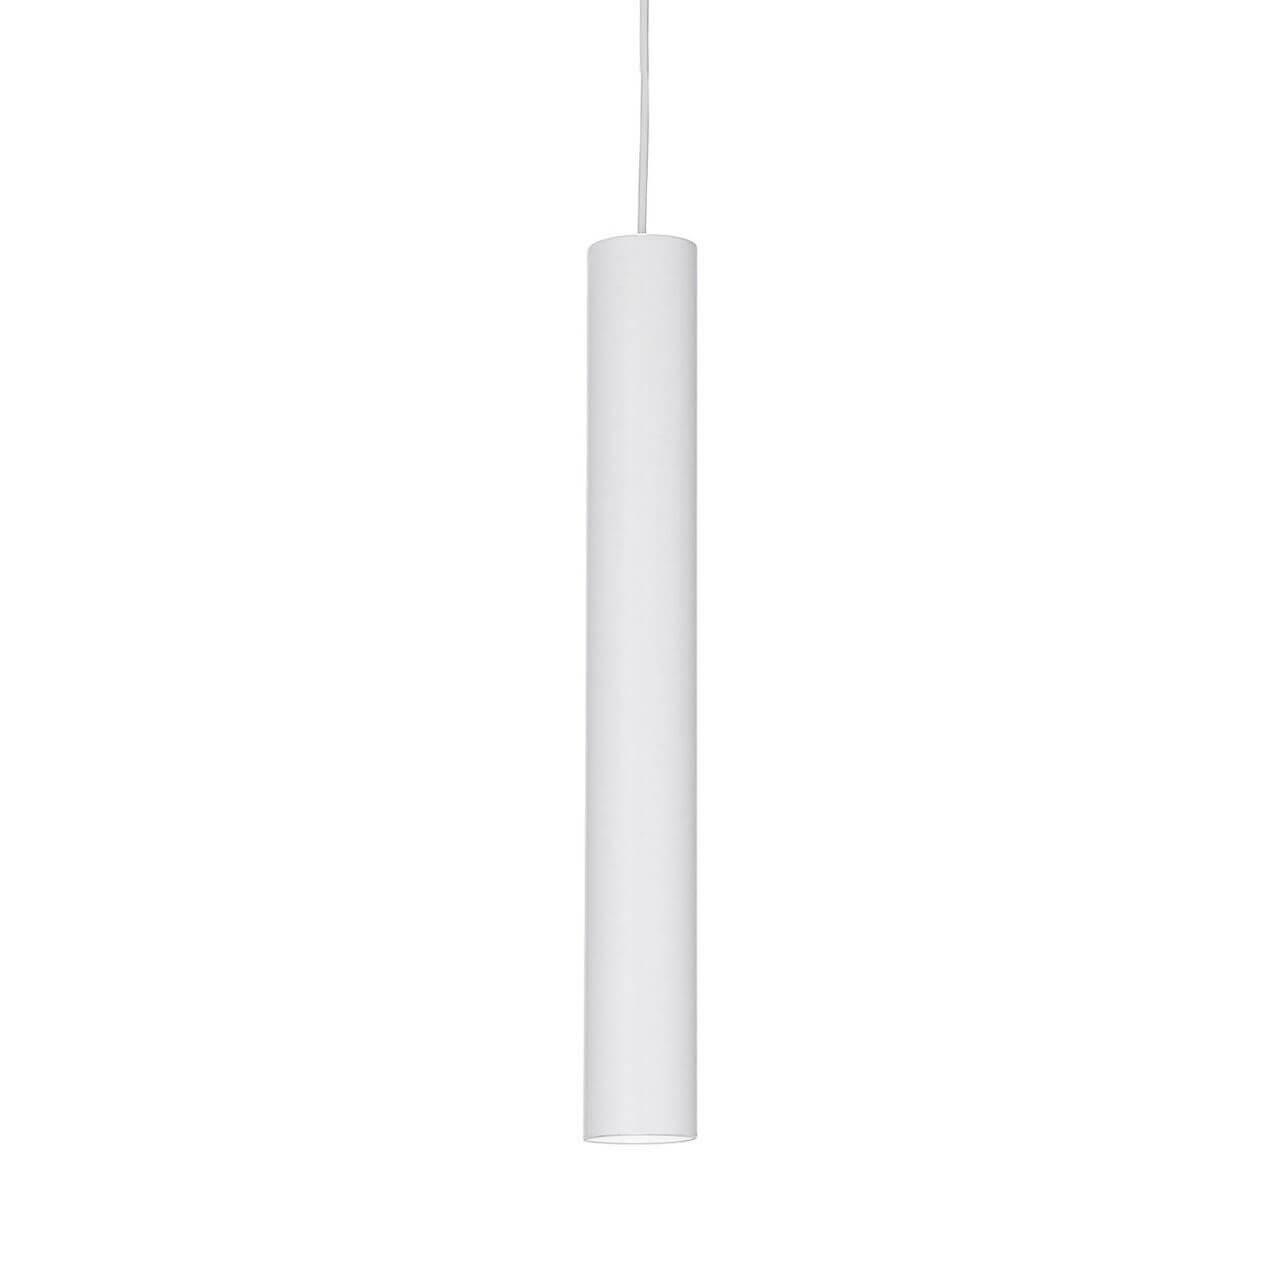    Ideal Lux Tube D6 Bianco 211701